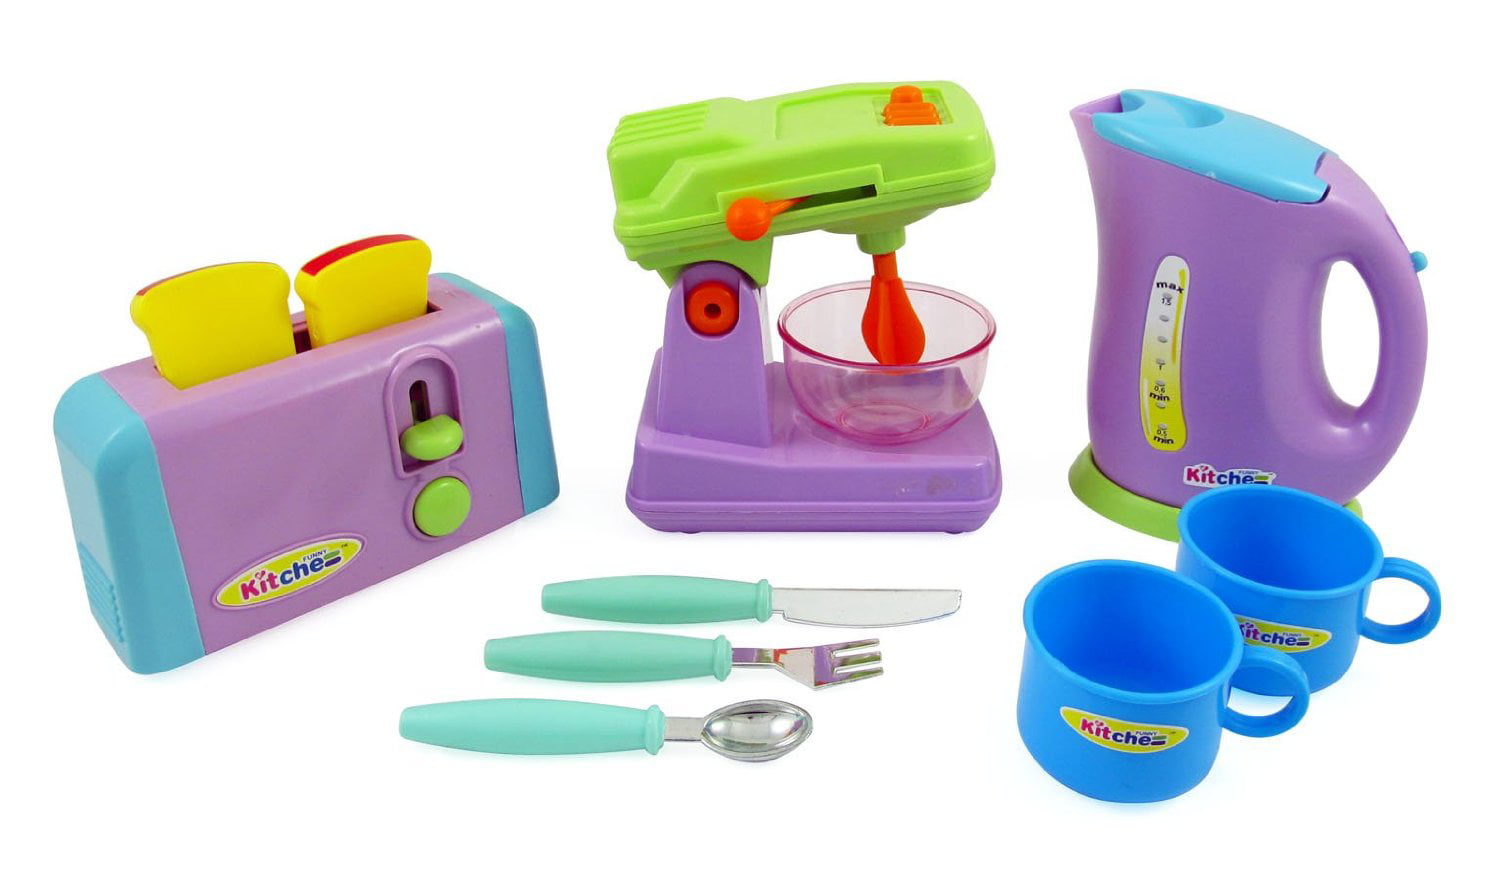 Household Kettle and Microwave Kitchen Set Kids Toy Set Realistic Electric Toy 